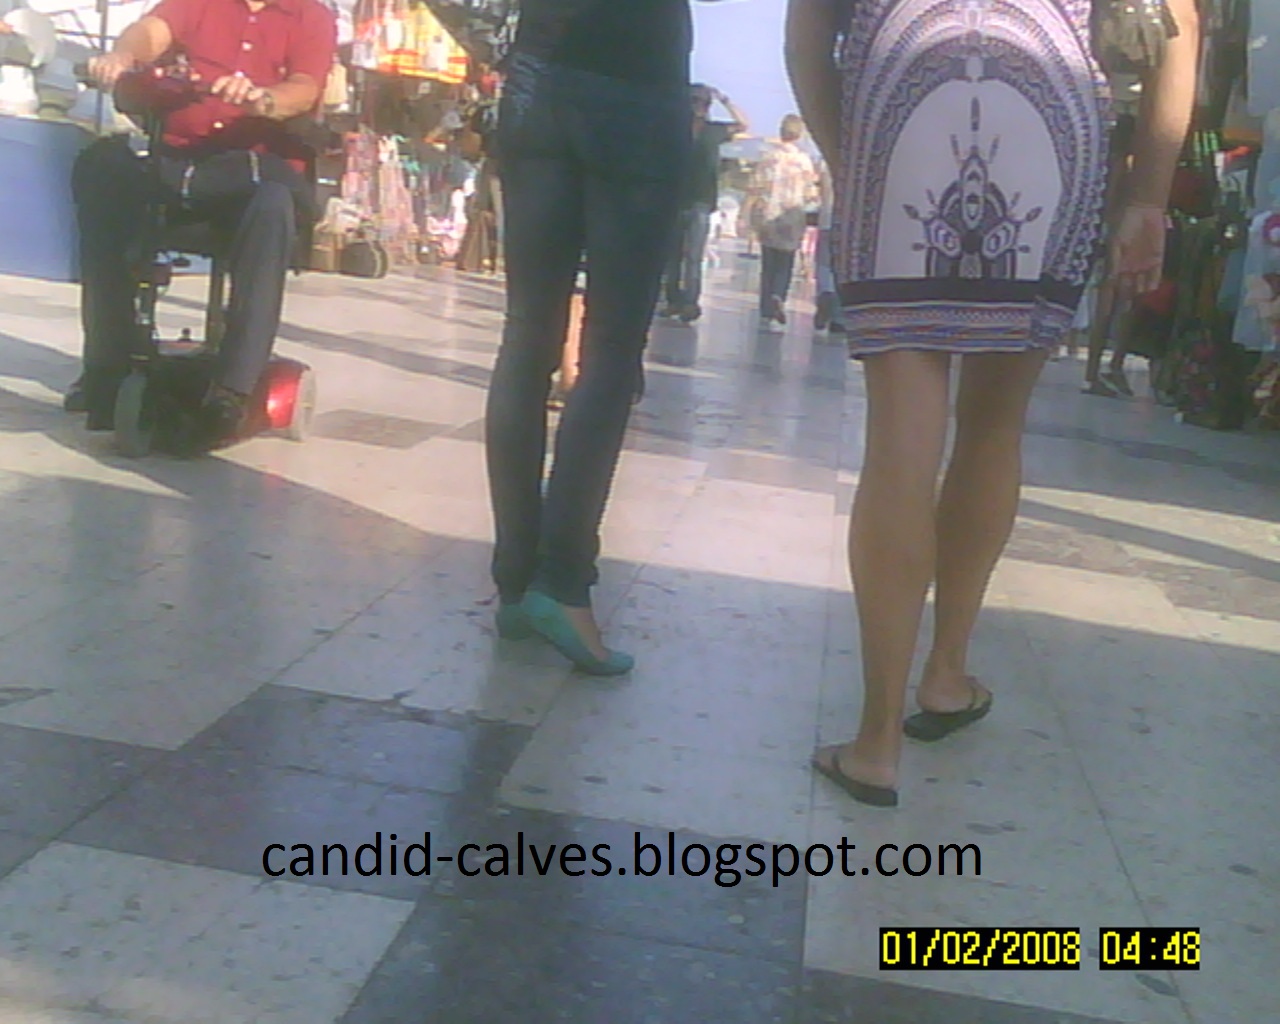 Ladies Candid Muscular Calves Candid Large Calves And